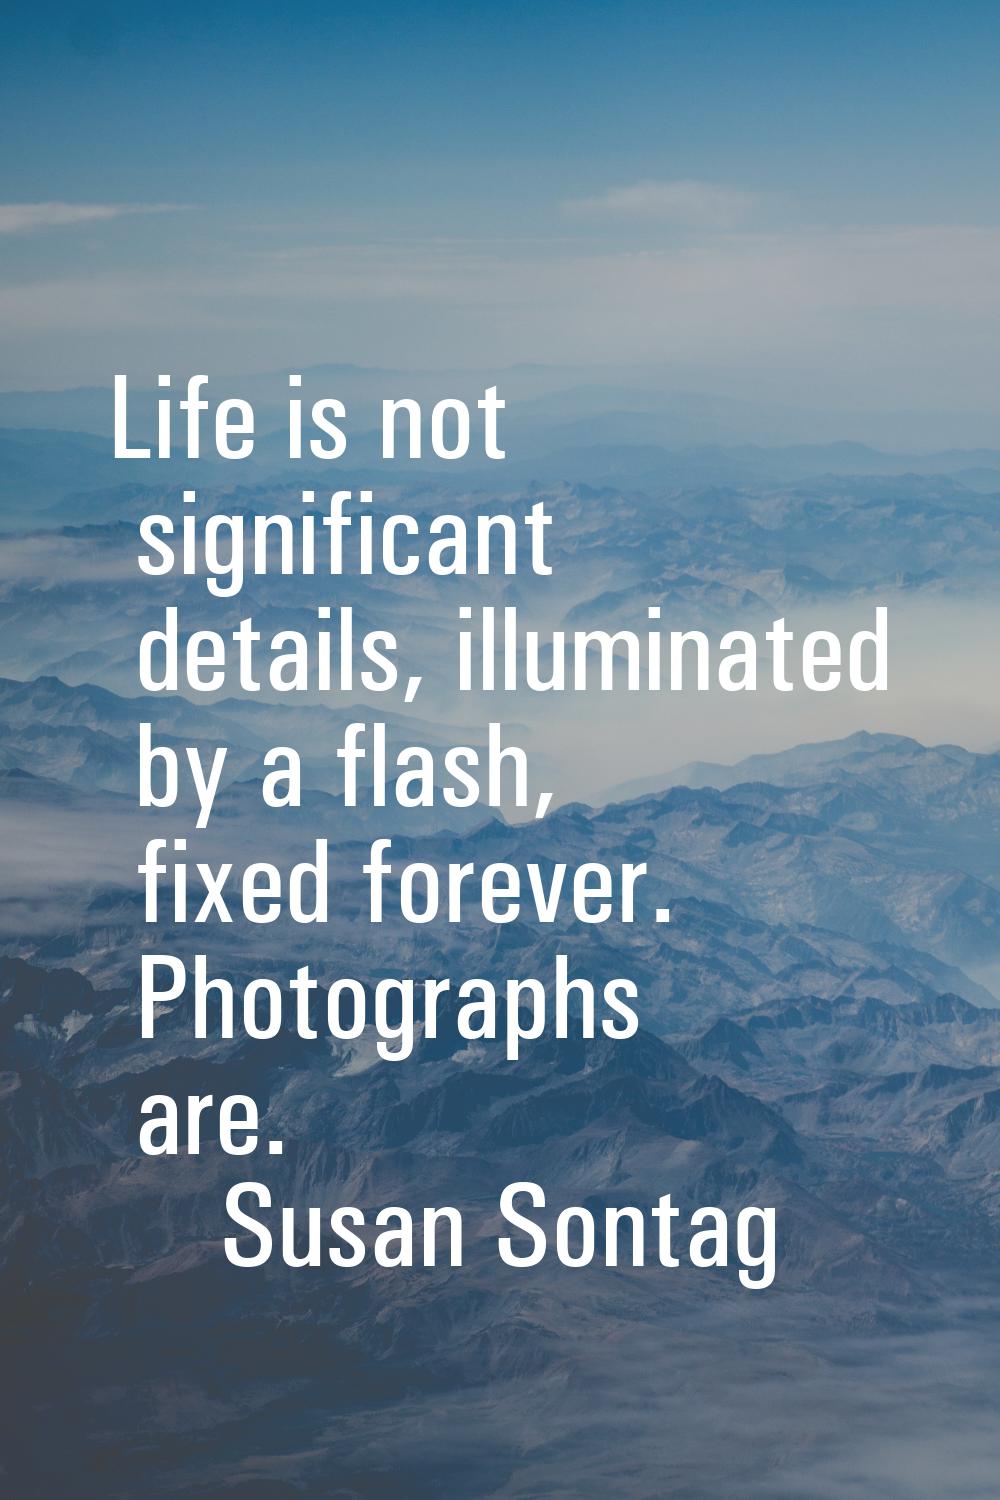 Life is not significant details, illuminated by a flash, fixed forever. Photographs are.